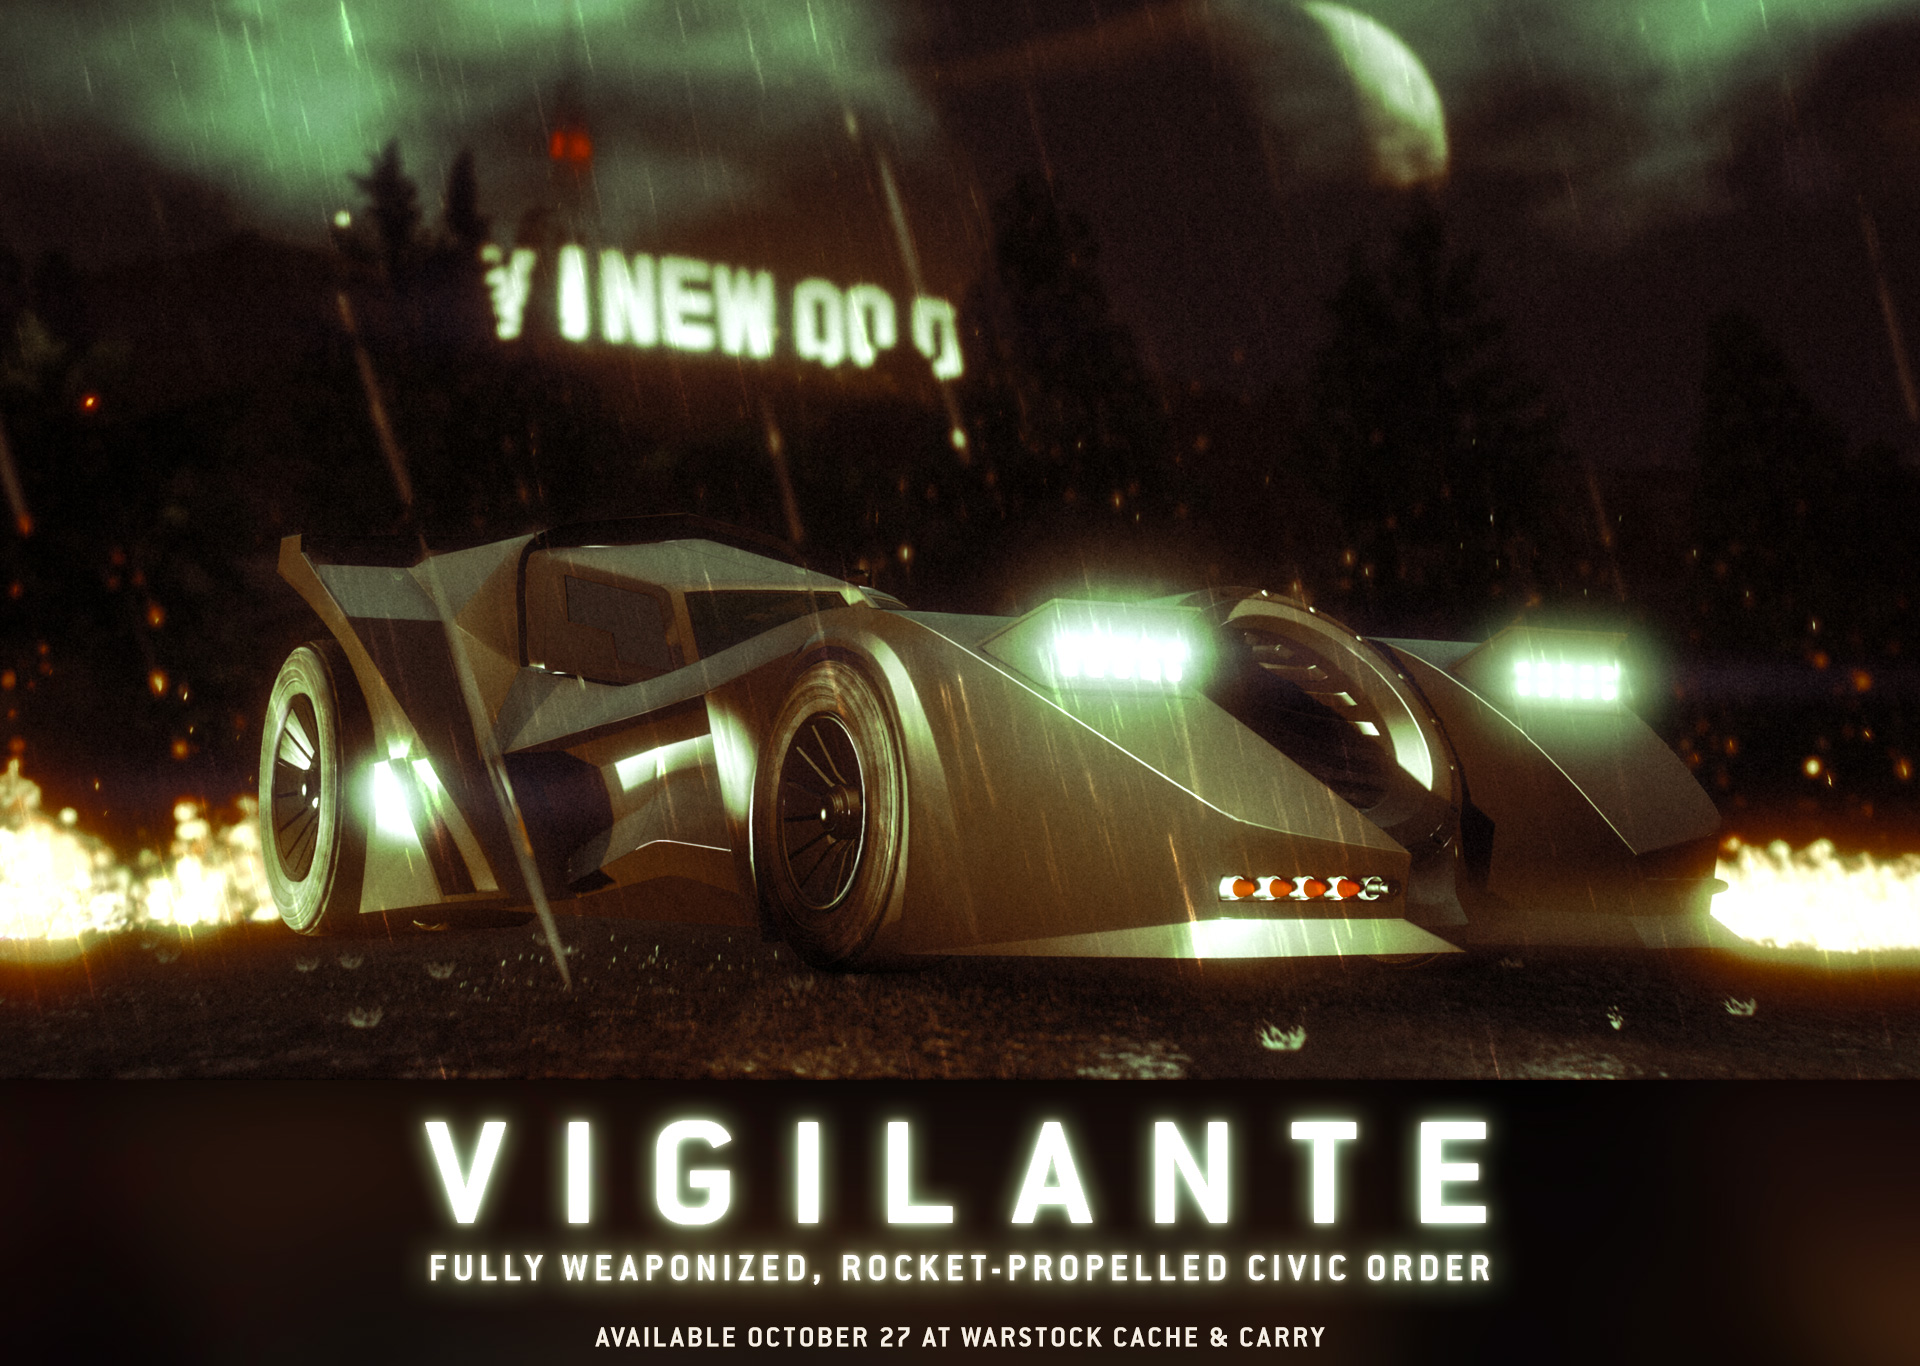 The Vigilante - The newest arrival to the game, available for purchase now